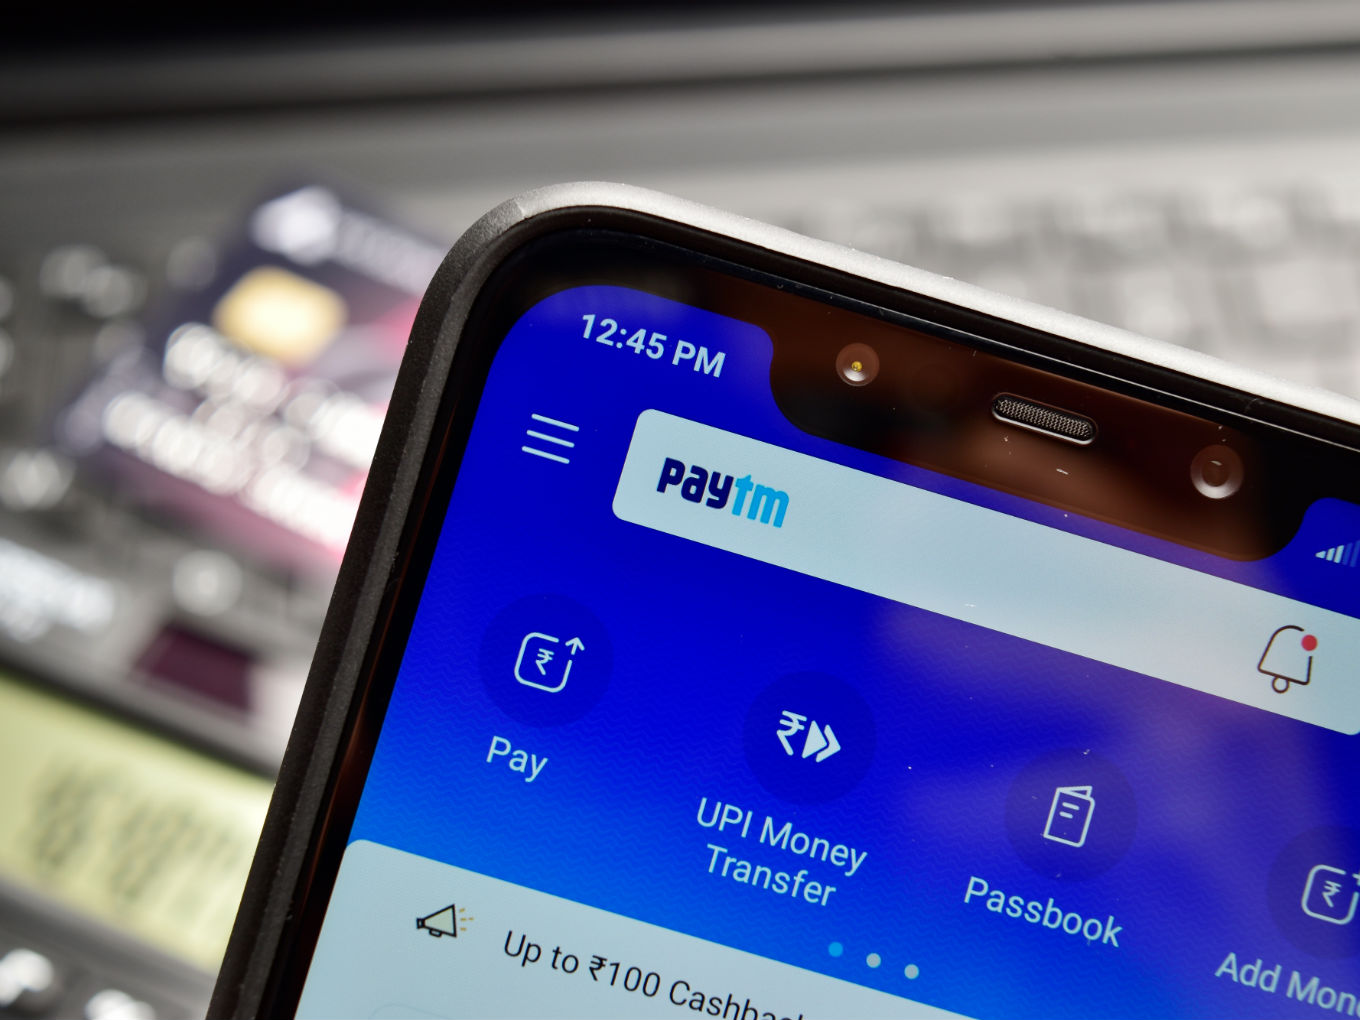 Paytm Looks To Scale Up Lending Business To Amp Up Revenues